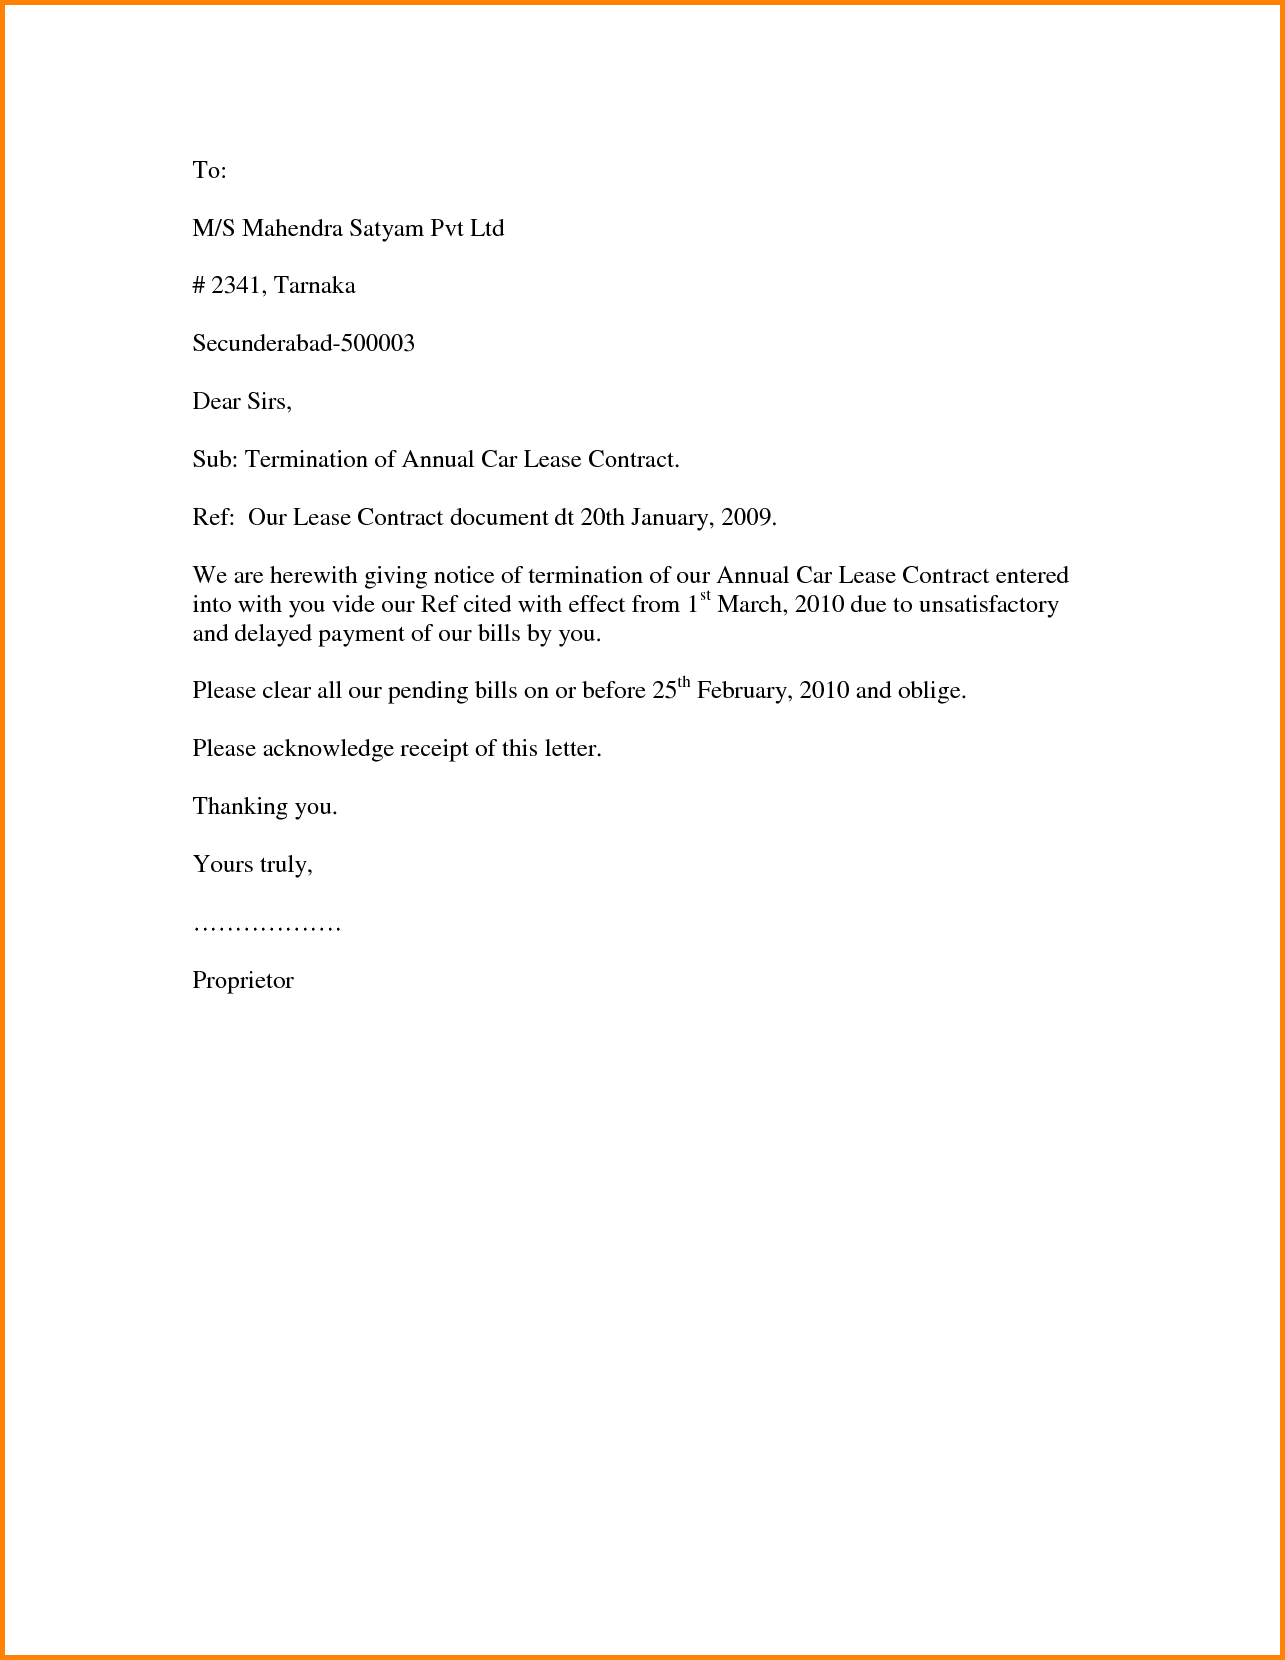 contract termination letter template example-Letter Template To End A Contract Copy Contract Letter Work Sample 4-e